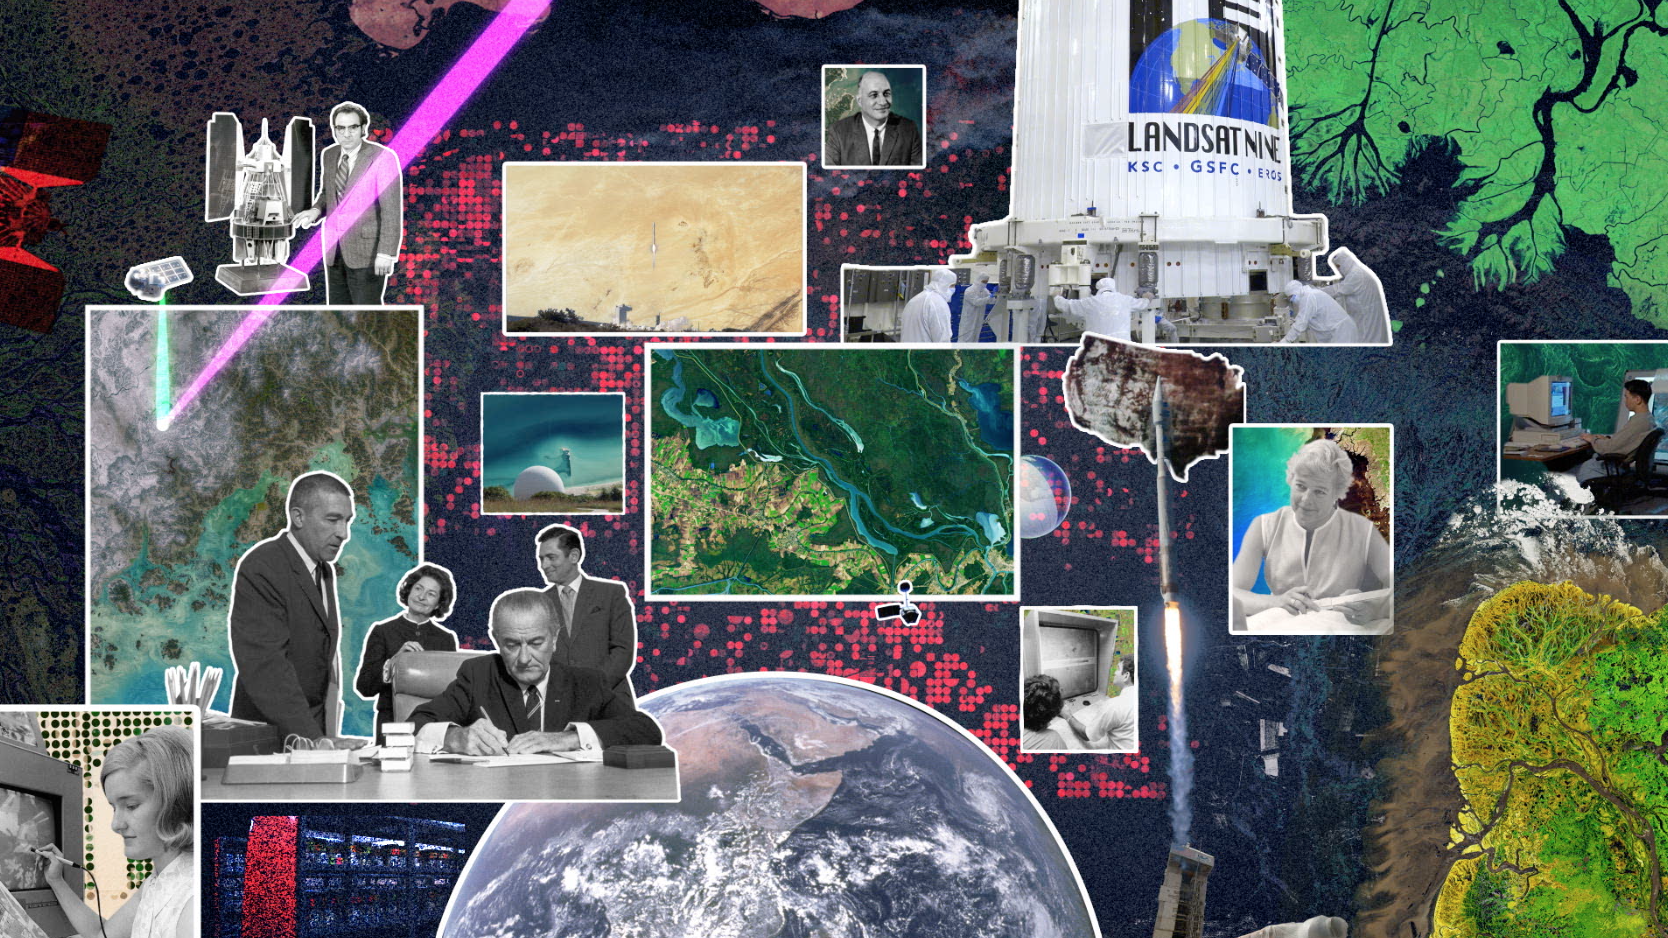 In celebration of the launch of Landsat 9, we count down 9 things about the Landsat mission, the science, the technology and the people who continue its legacy.Music: "Thought and Passion," "Hot Air Balloon Trip," "Cristal Delight," "Flying Aloft," "Castles and Cathedrals," "On Going Steps," "Ongoing Journey," "Home Staging," "Arpology," "All Life Long," "Luv Beam," "Interchangeable Parts," "Electricity Tracks," "Digital Travelers," "Hyperion," Universal Production Music. 